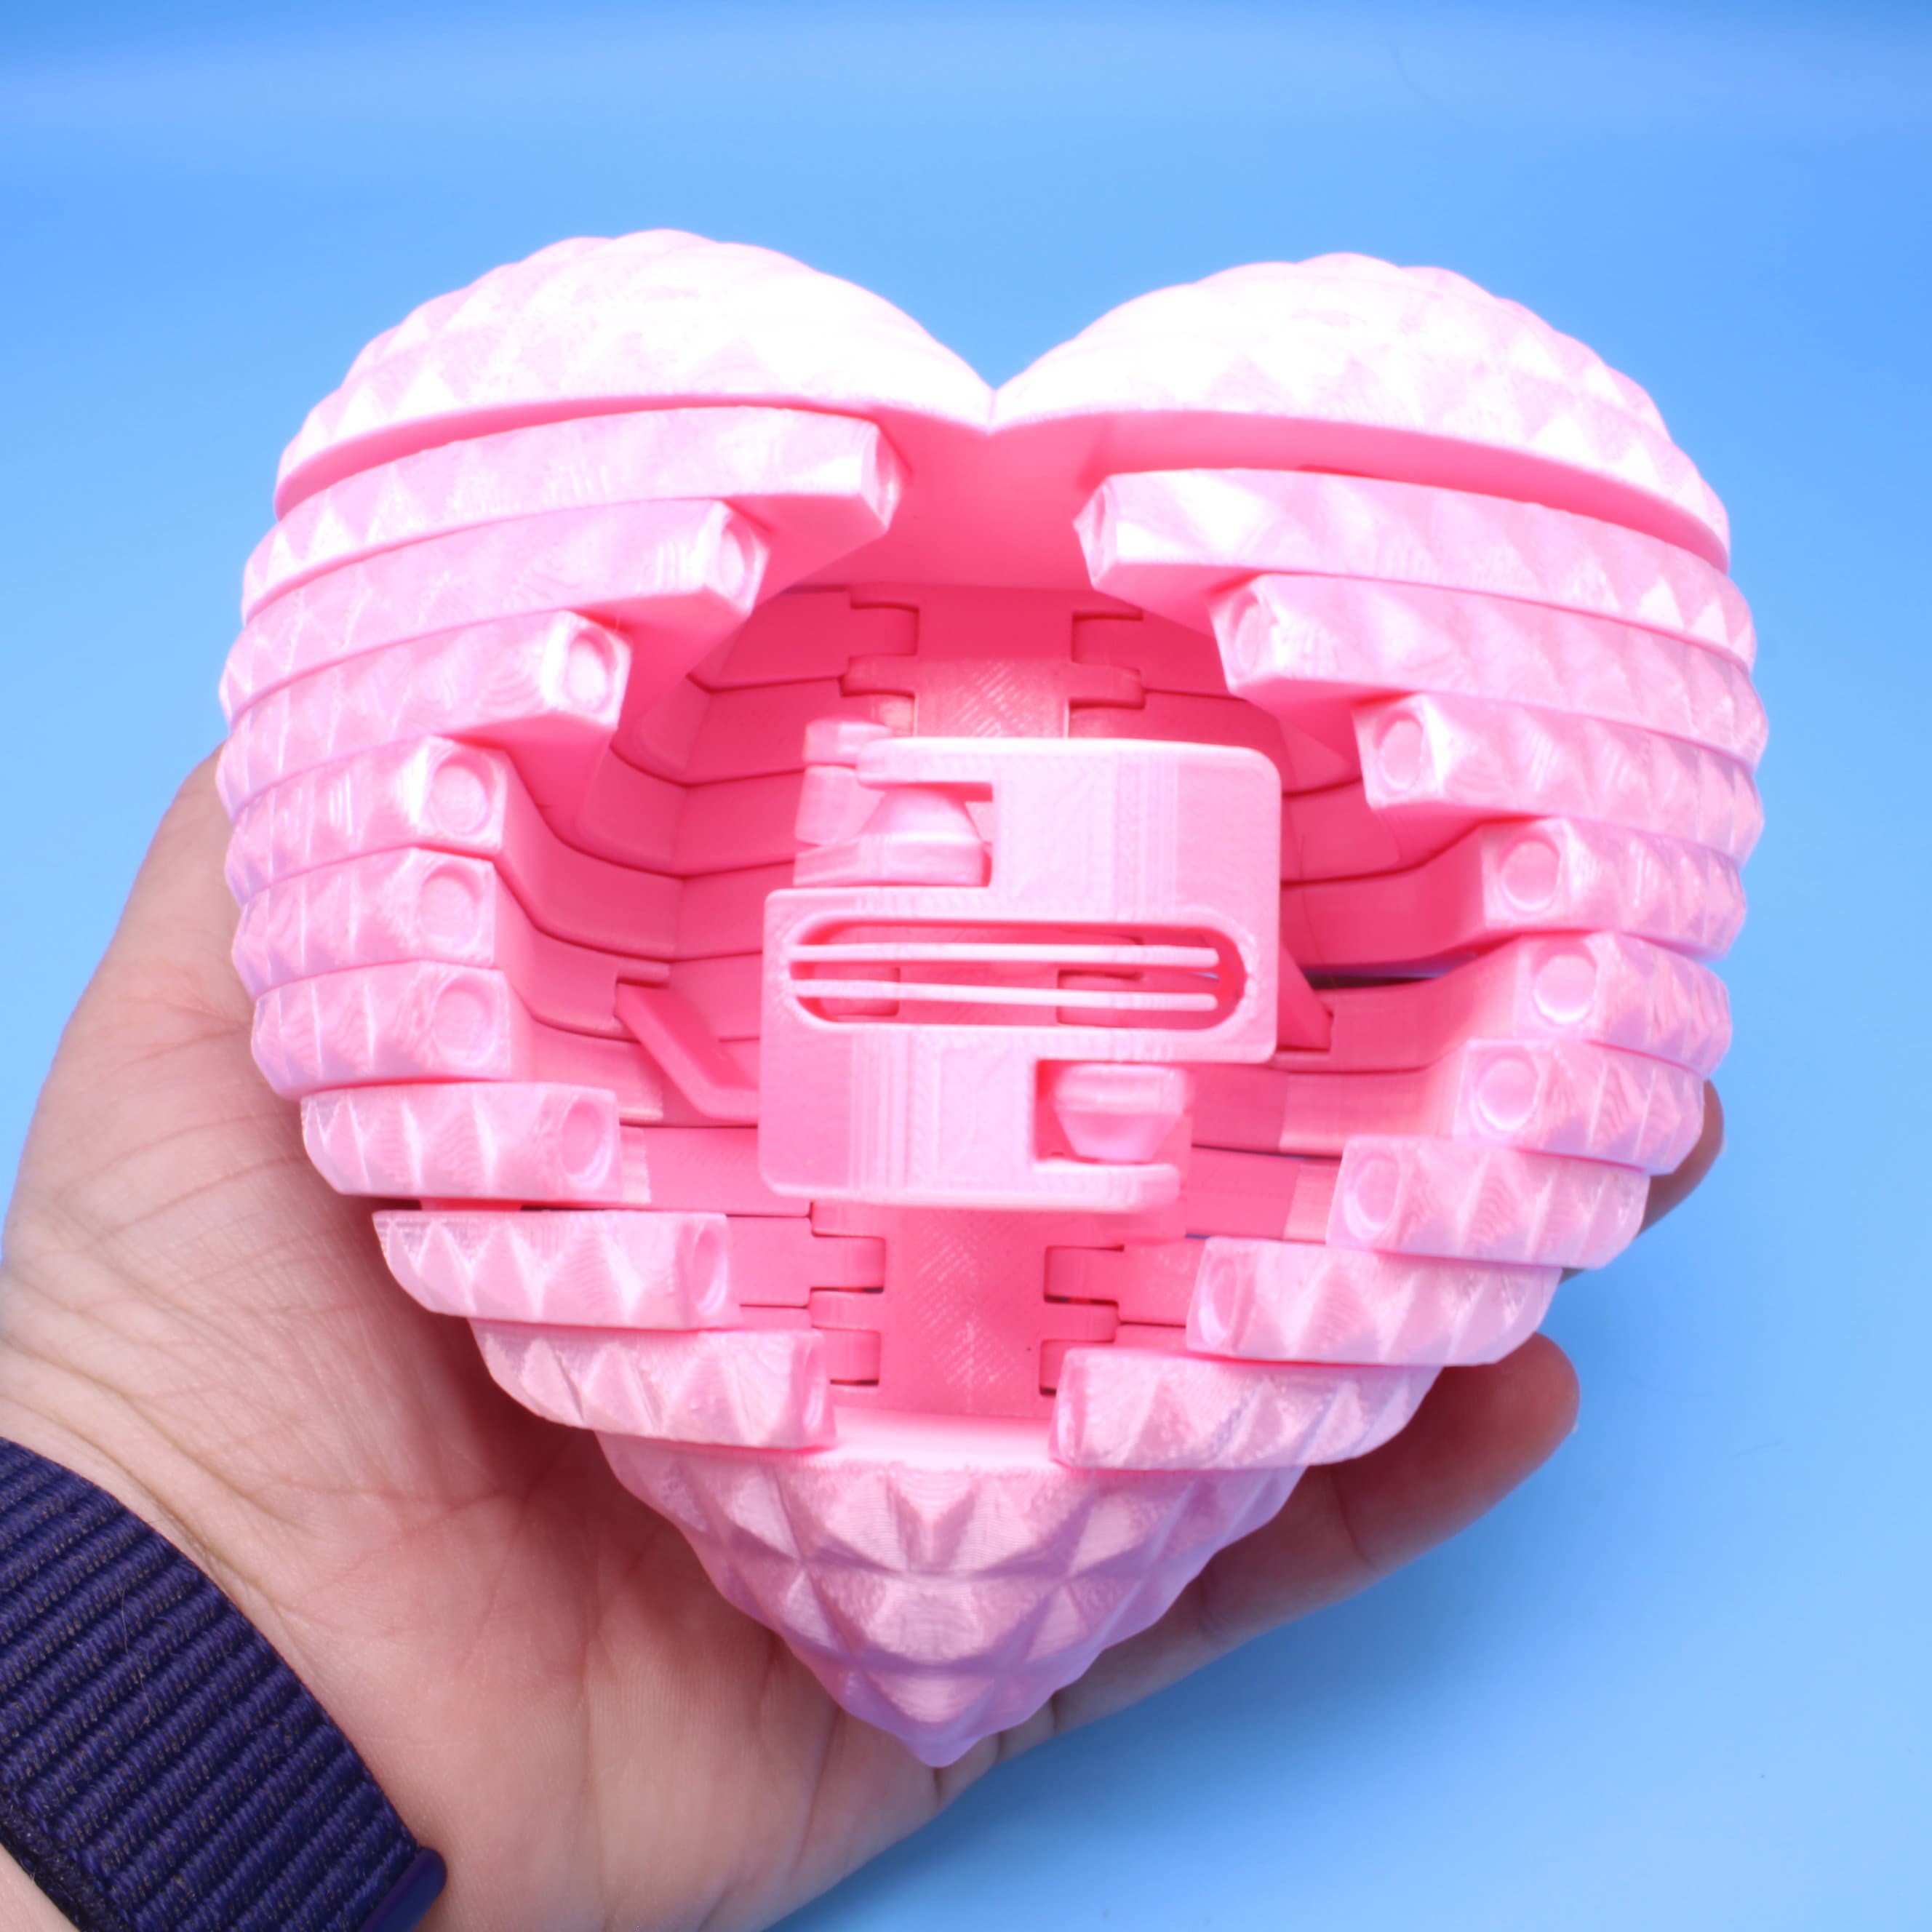 Articulated Open Heart Proposal 3D Printed